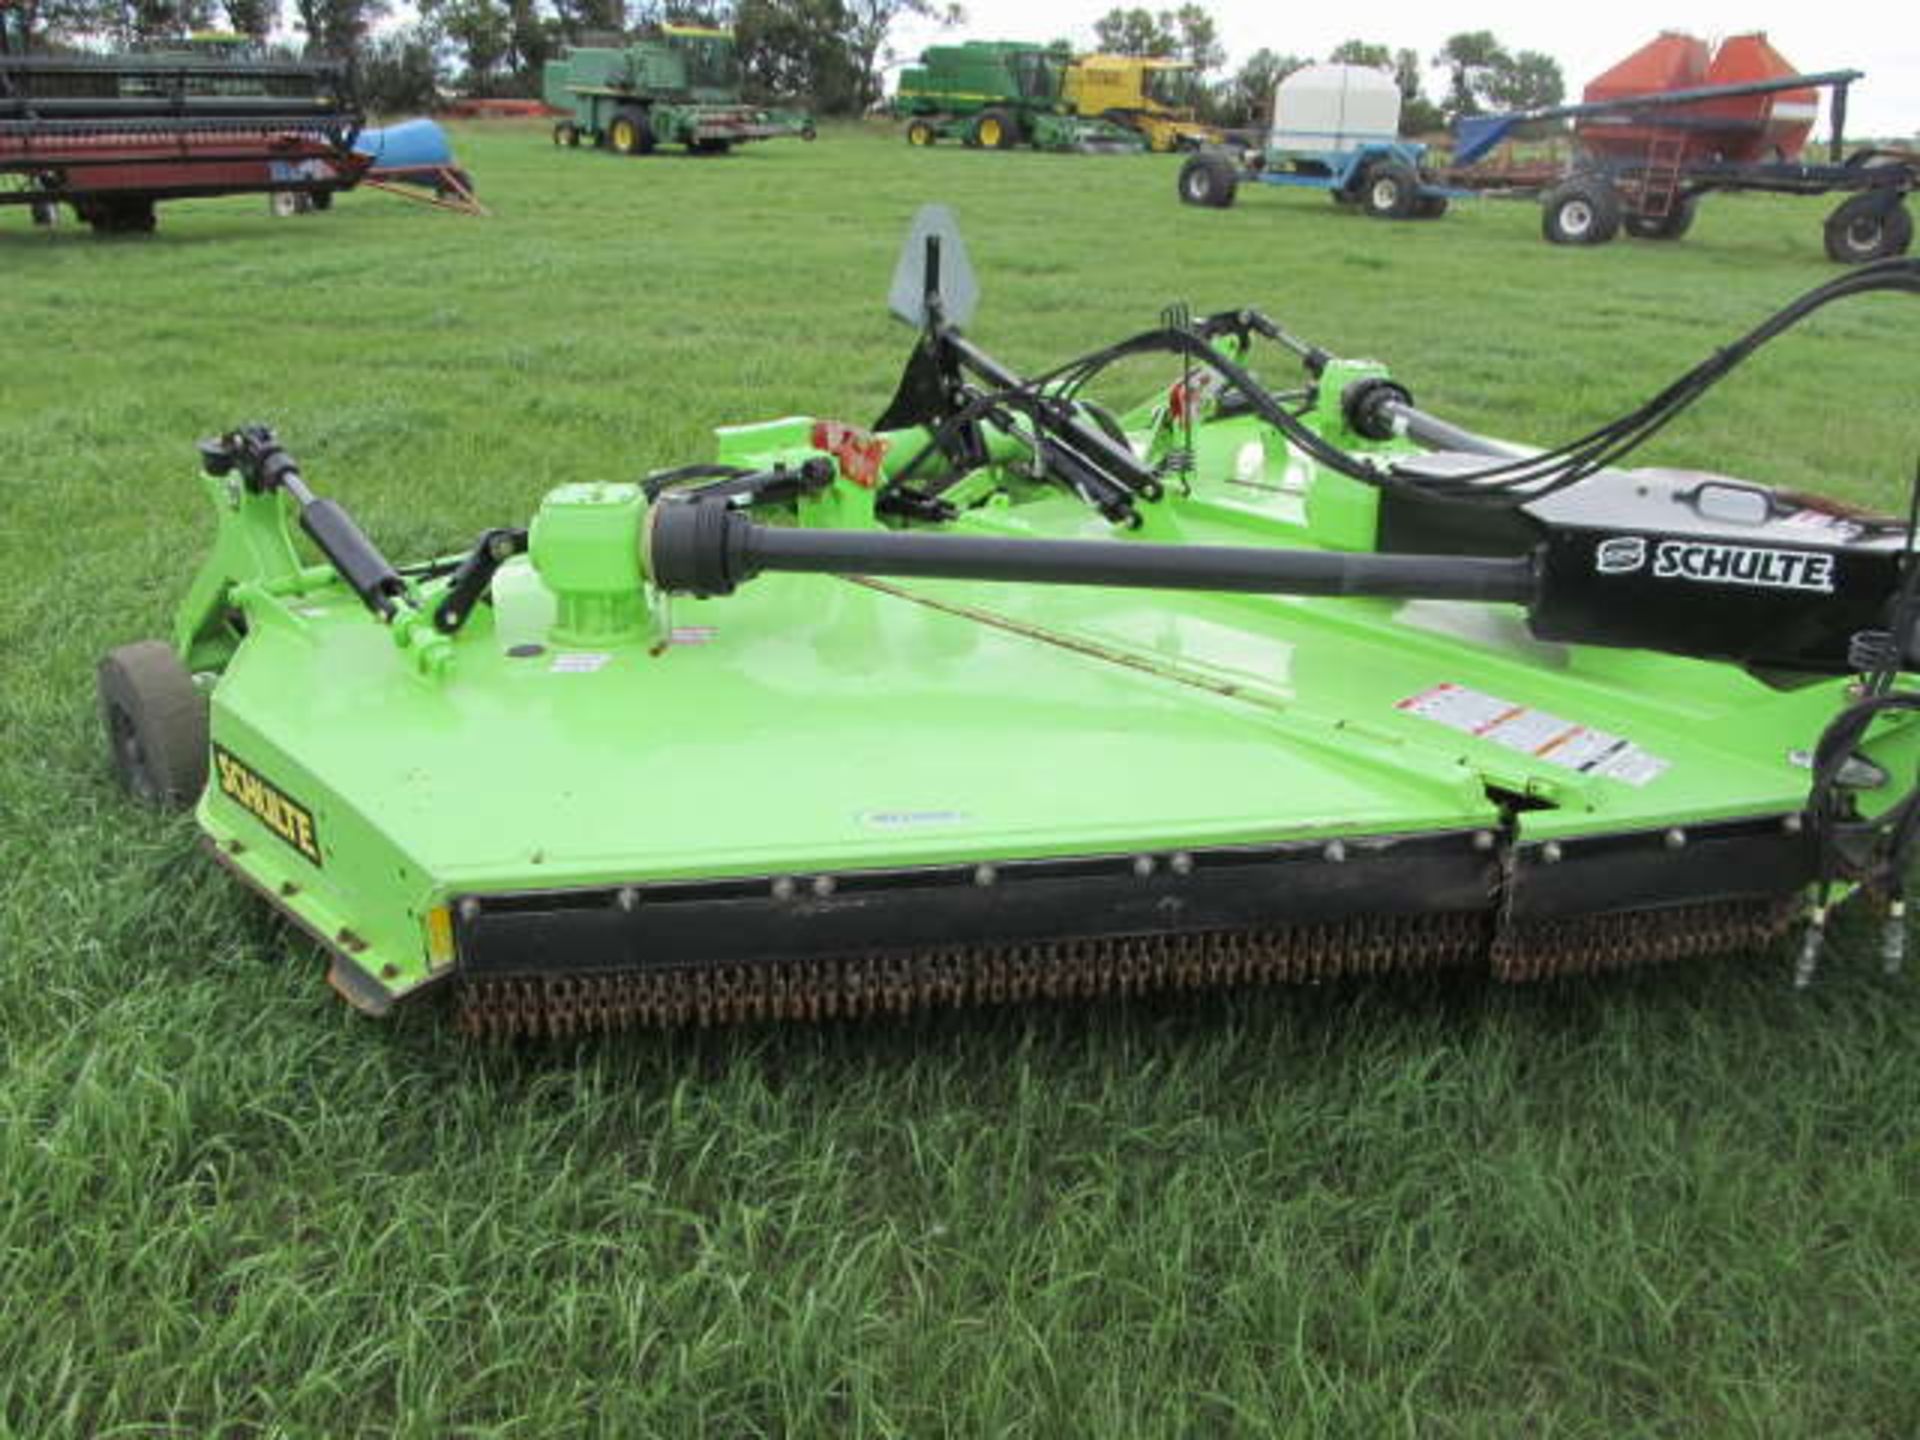 SCHULTE XH-1500 SERIES 3 ROTARY MOWER - Image 2 of 5